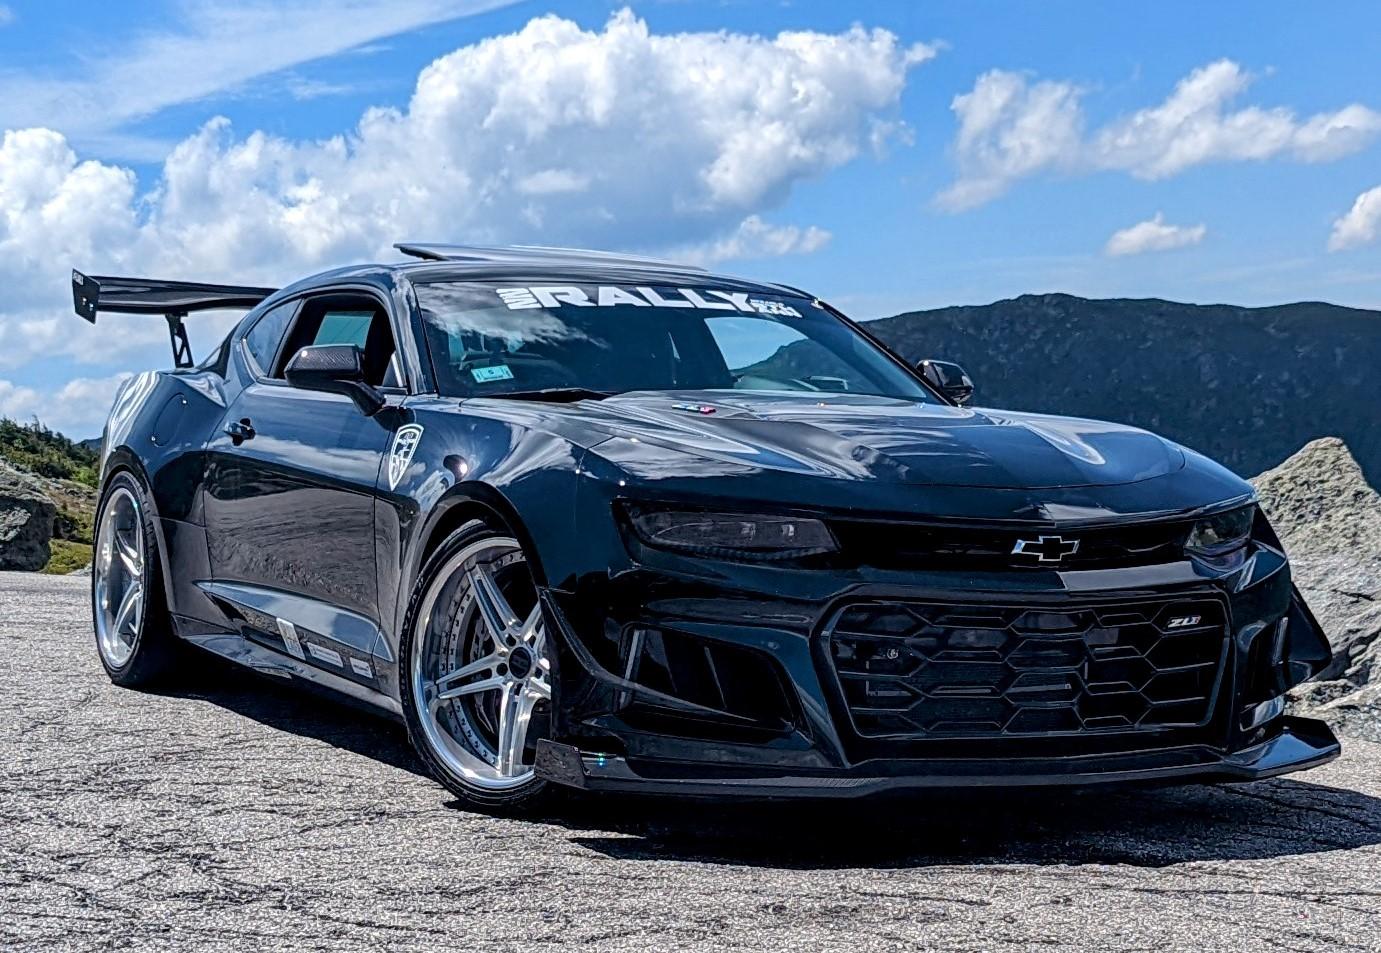 Highly Modified 2018 Chevrolet Camaro ZL1 - 850 HP - Track Ready / Street Legal - NEW PICS & VIDEO